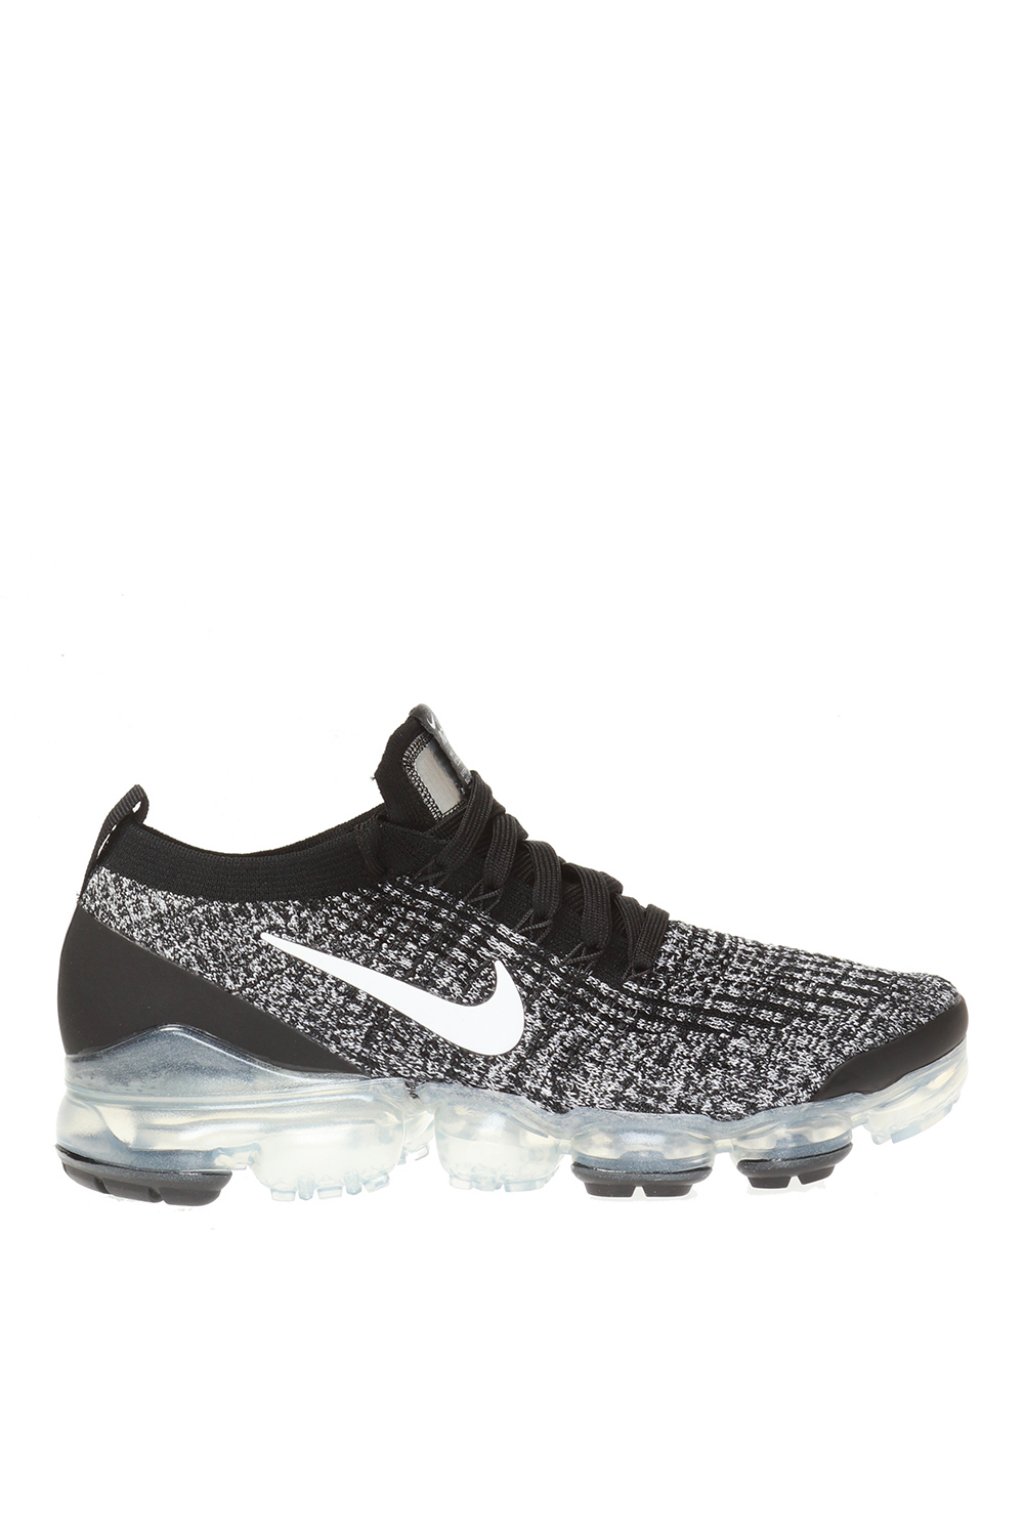 vapormax hk,Free delivery,goabroad.org.pk